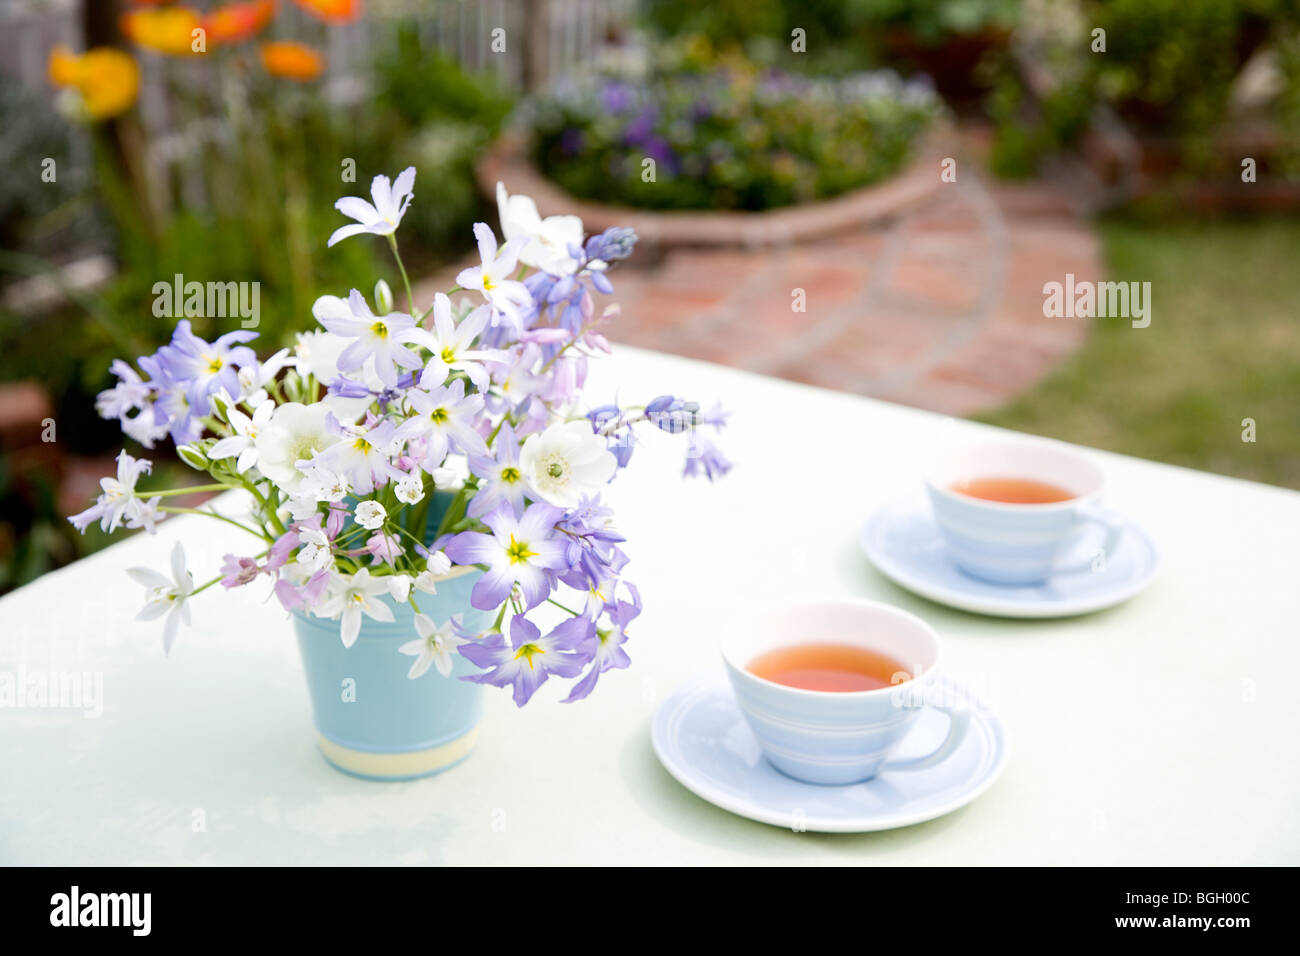 Cups of tea and bunch of flowers on an outdoor table Stock Photo